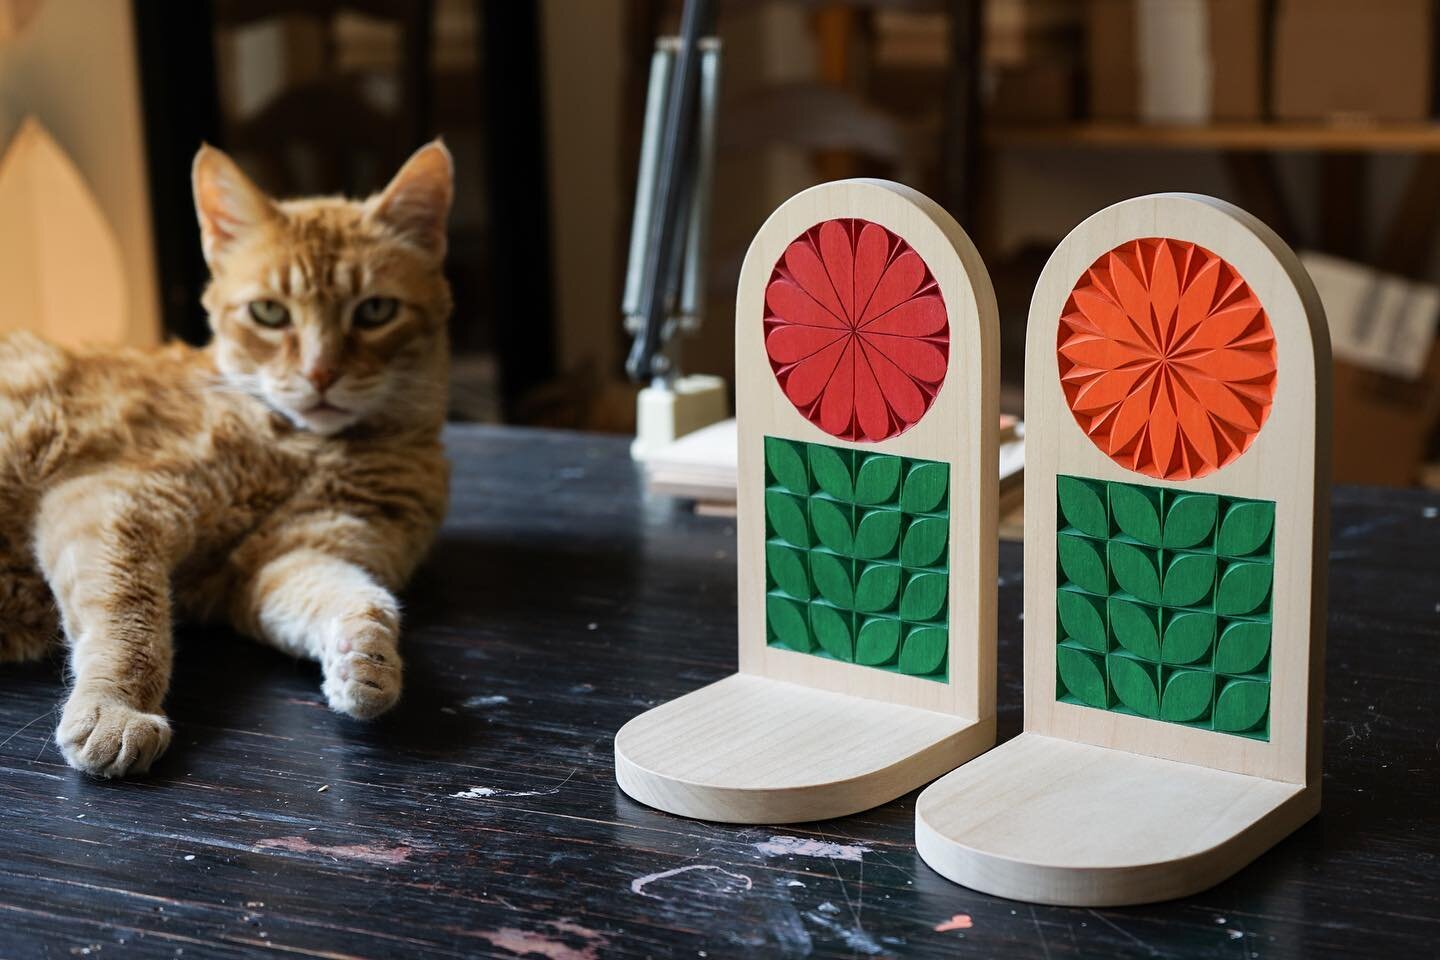 Two curios shelves, now available in my studio shop. Link in my bio.
​
​#woodcarving #chipcarving #catsofinstagram #flowers
​